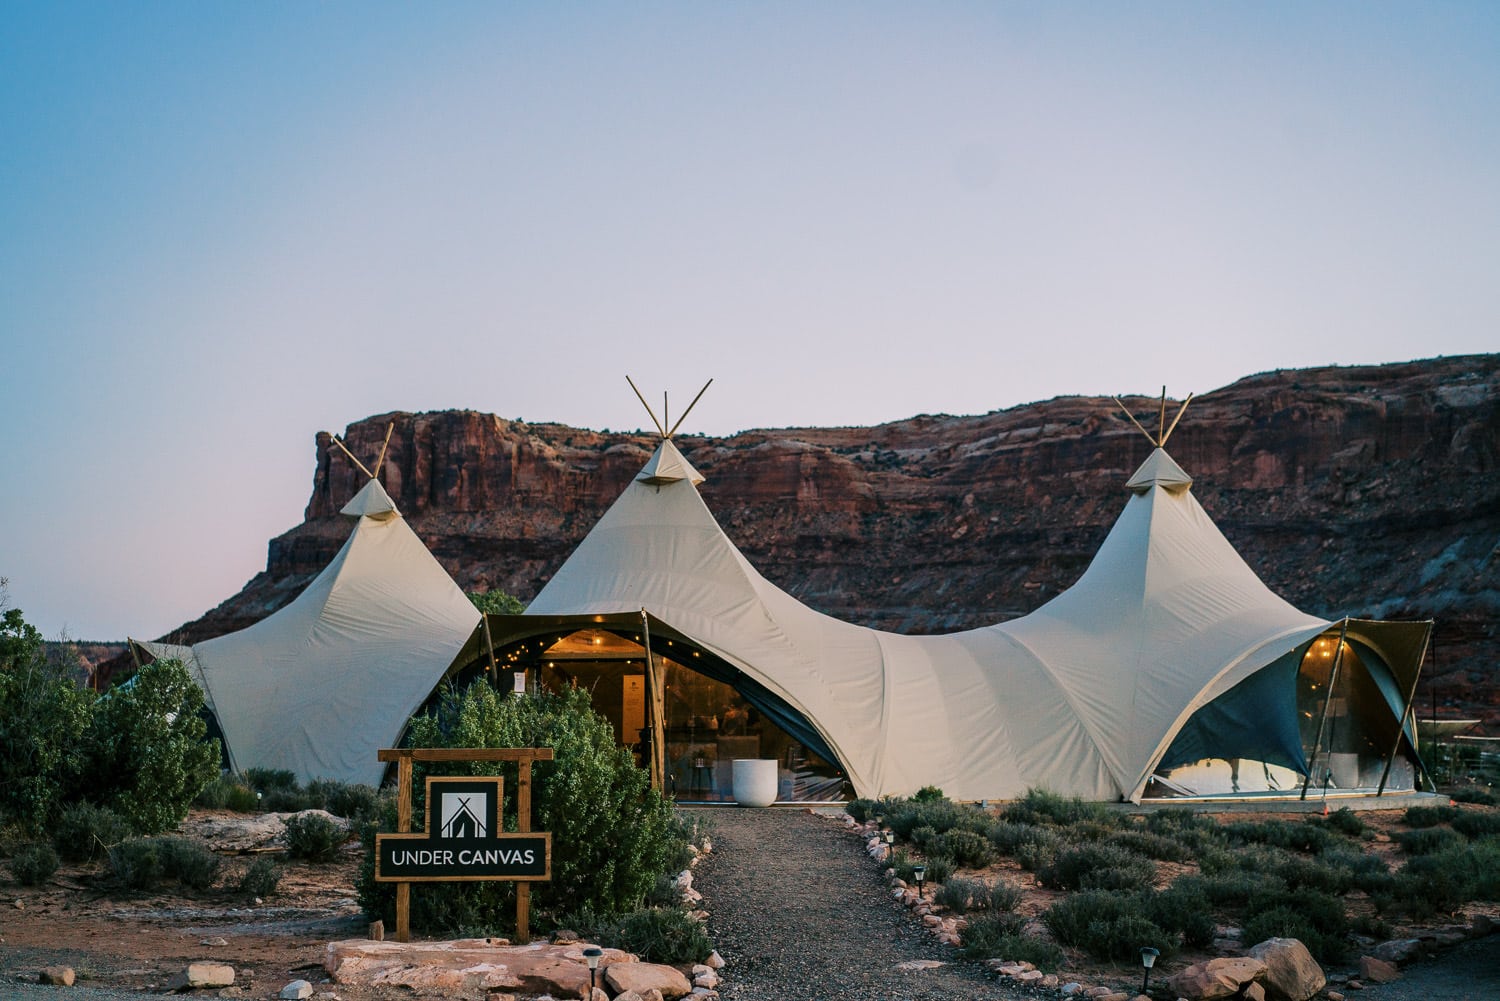 Under Canvas in Moab, Utah. The best places to stay in Moab.